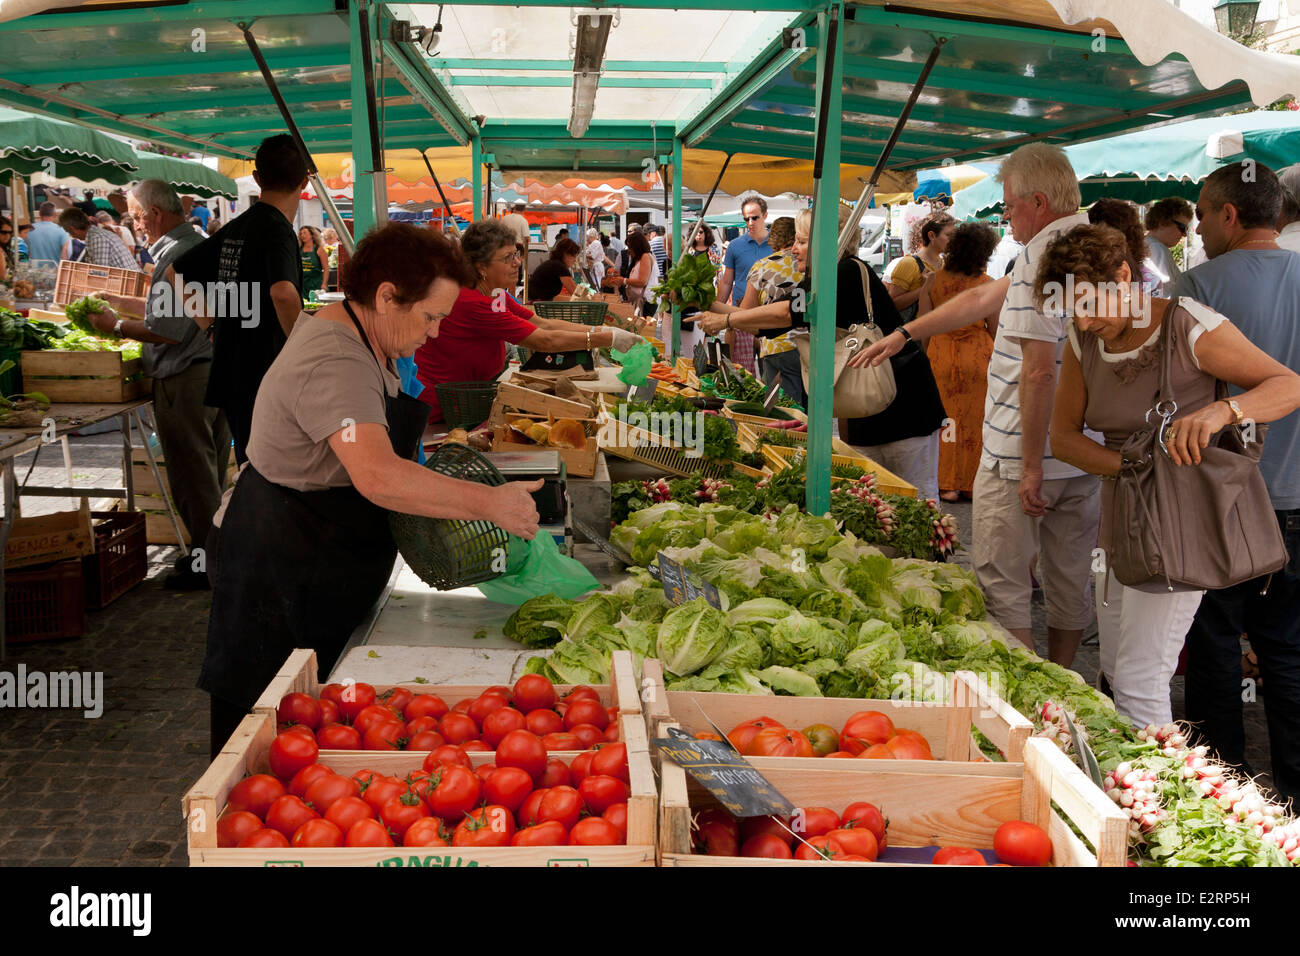 A typical French market. Stock Photo